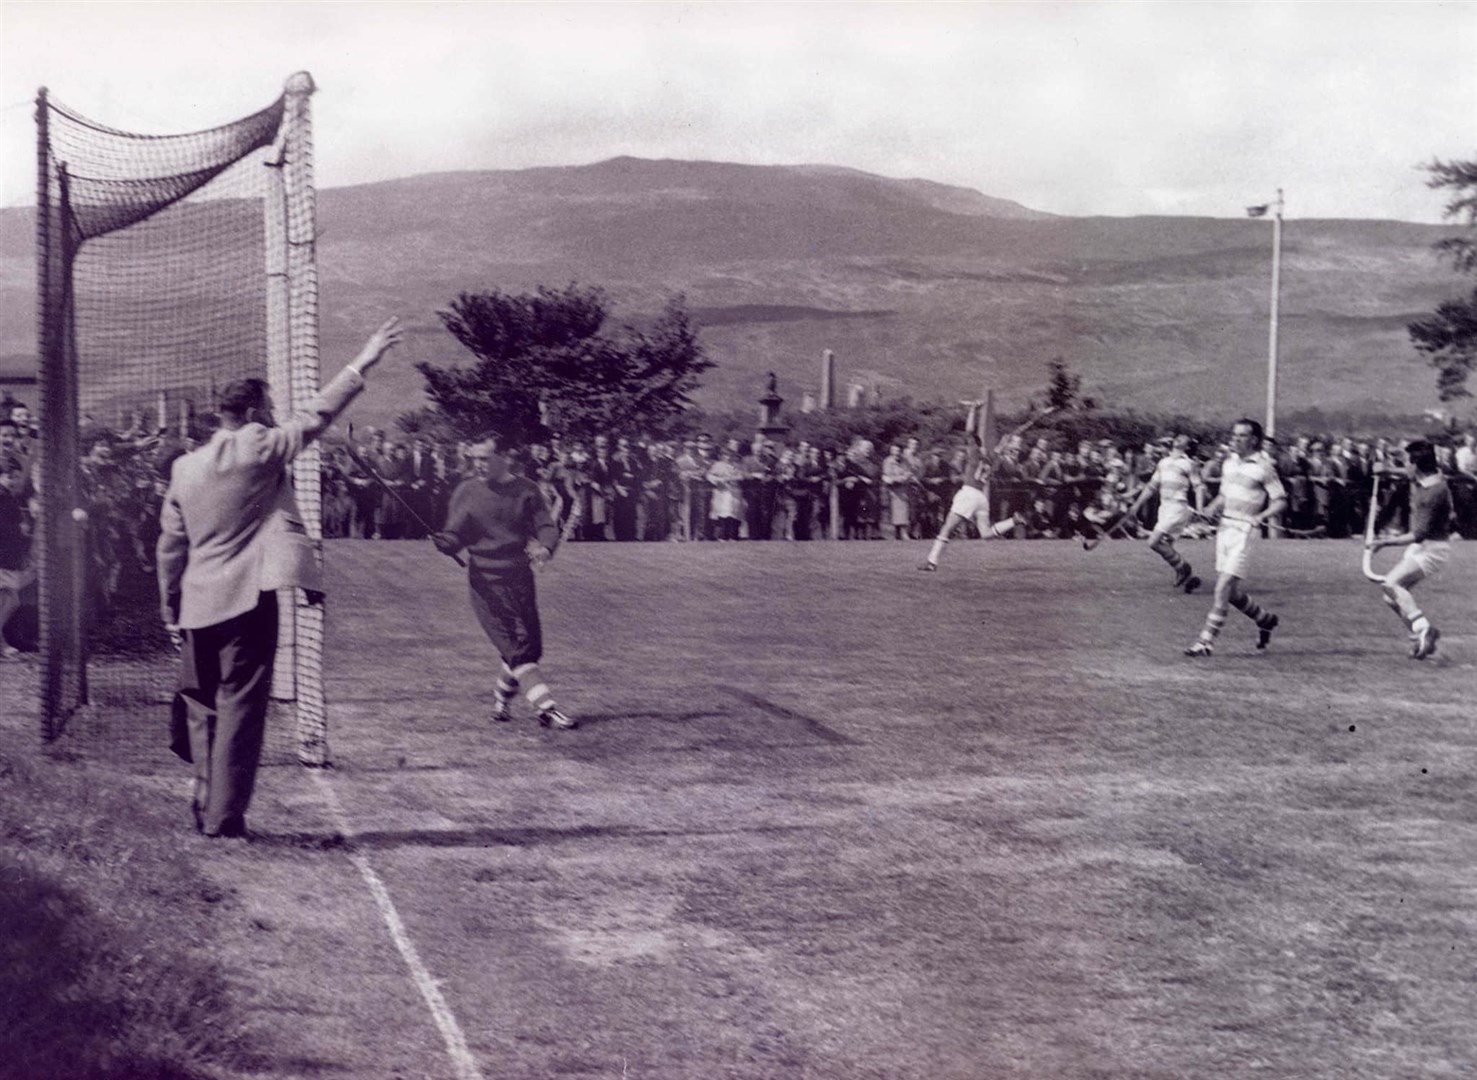 Donnie Grant wheels away in delight after scoring in the 1961 Camanachd Cup Final versus Oban Celtic at Fort William. The Kings won 2-1 to lift the cup for the first time in 40 years.